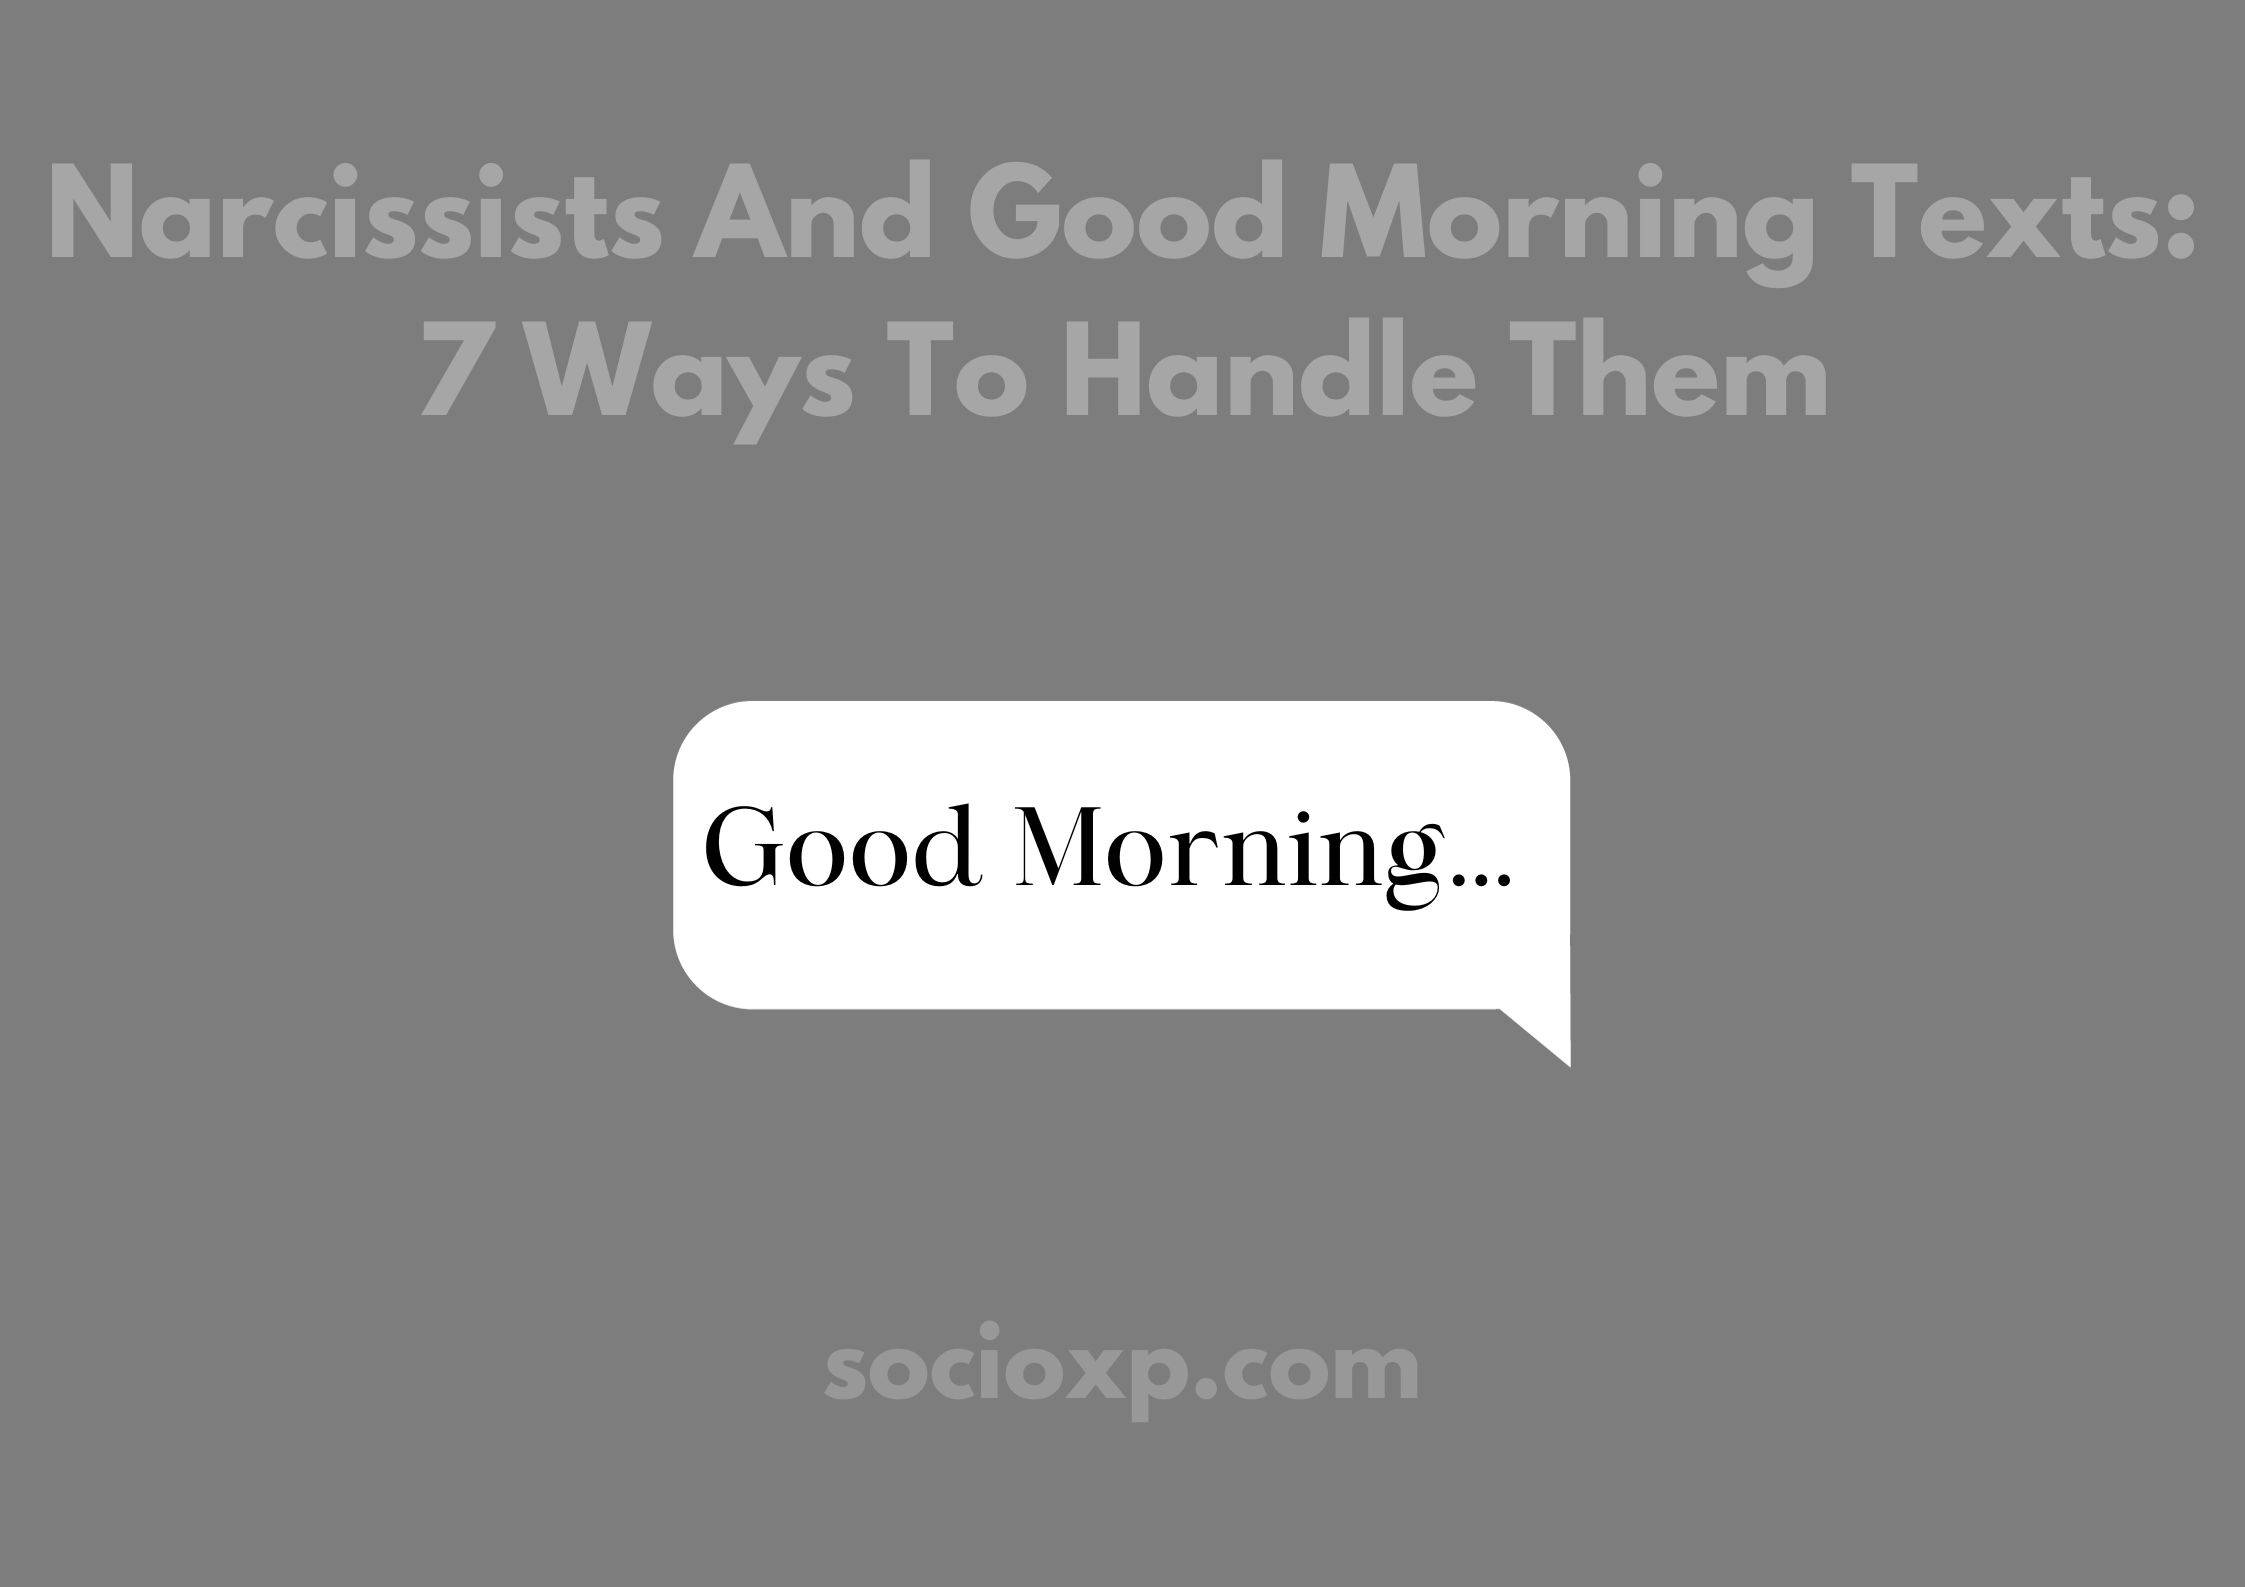 Narcissists And Good Morning Texts: 7 Ways To Handle Them